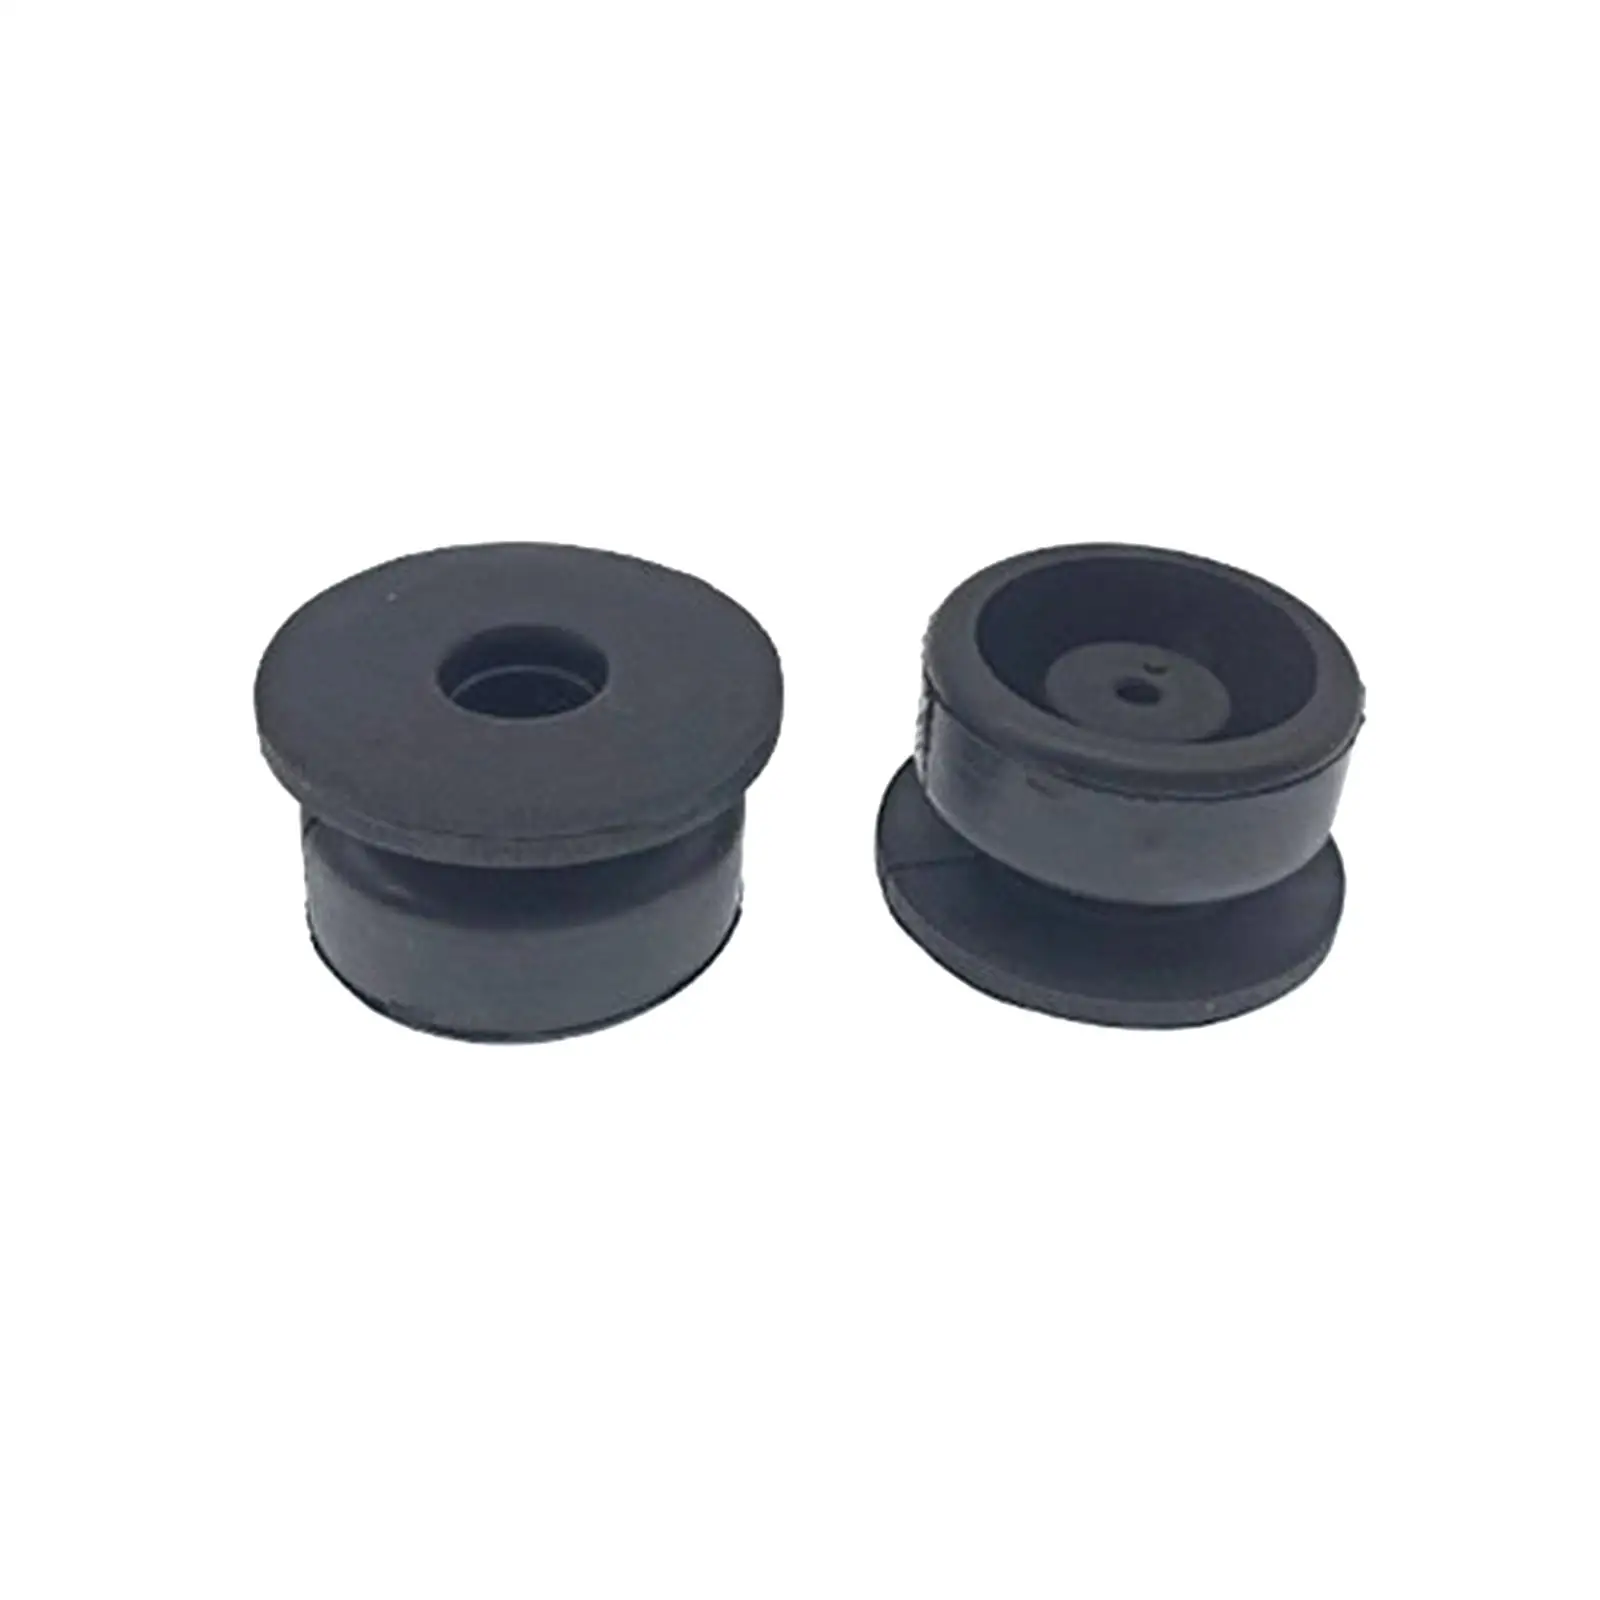 2 Pieces Radiator Cushion Replacement 74172-Sm4-000 Accessory Rubber Cushion Bushing for Honda Cr-V Accord Civic Acura